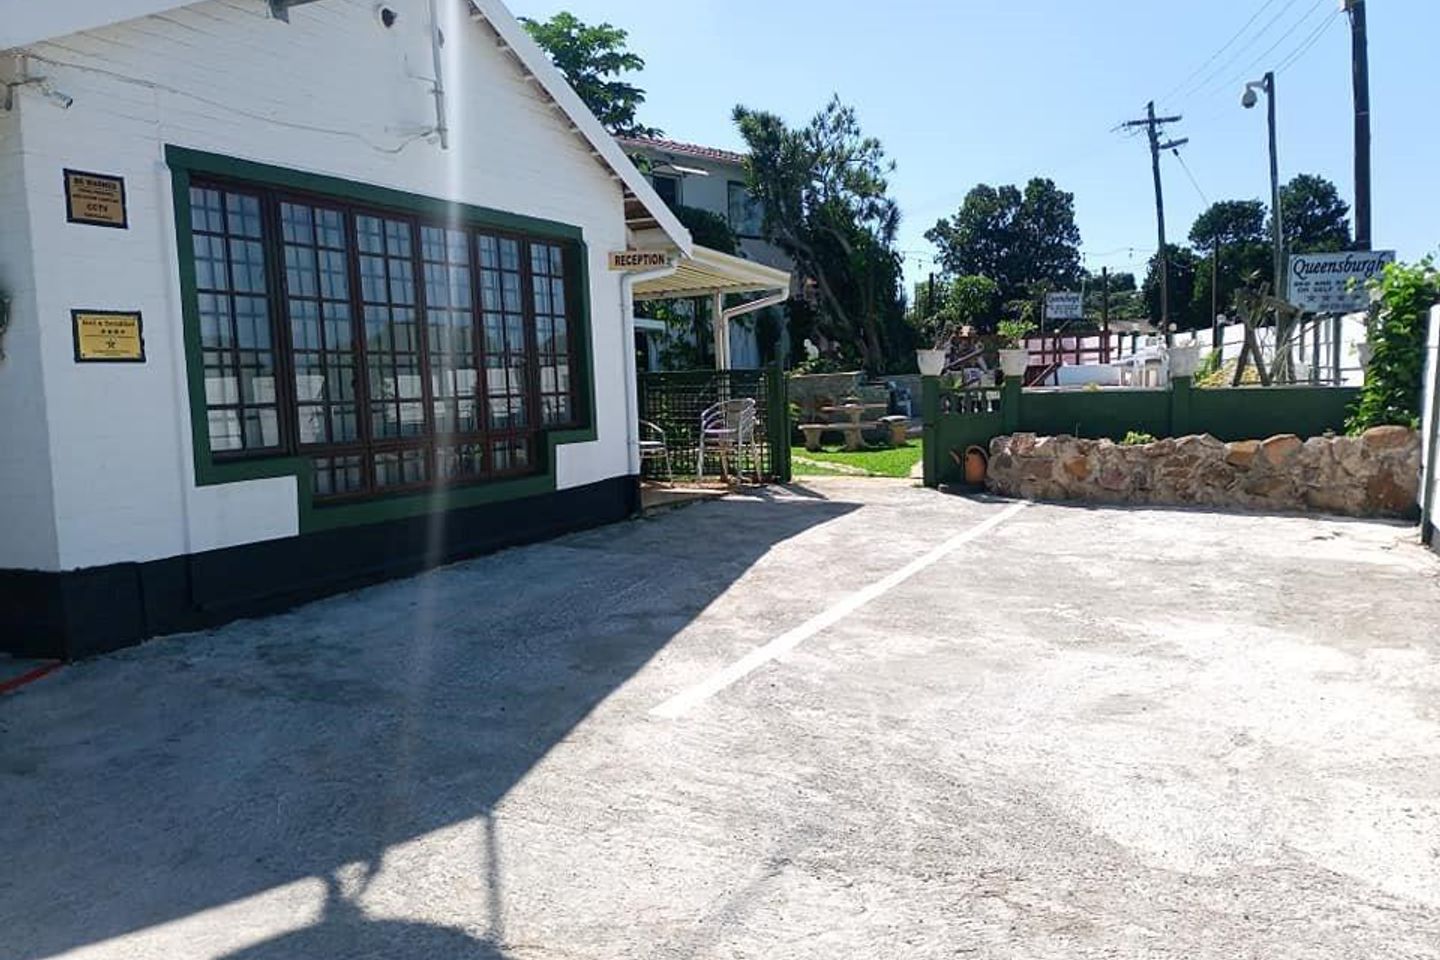 Superb 9 Bed Guest House For Sale In Queensburgh Durban South Africa, Durban, KwaZulu Natal, South Africa